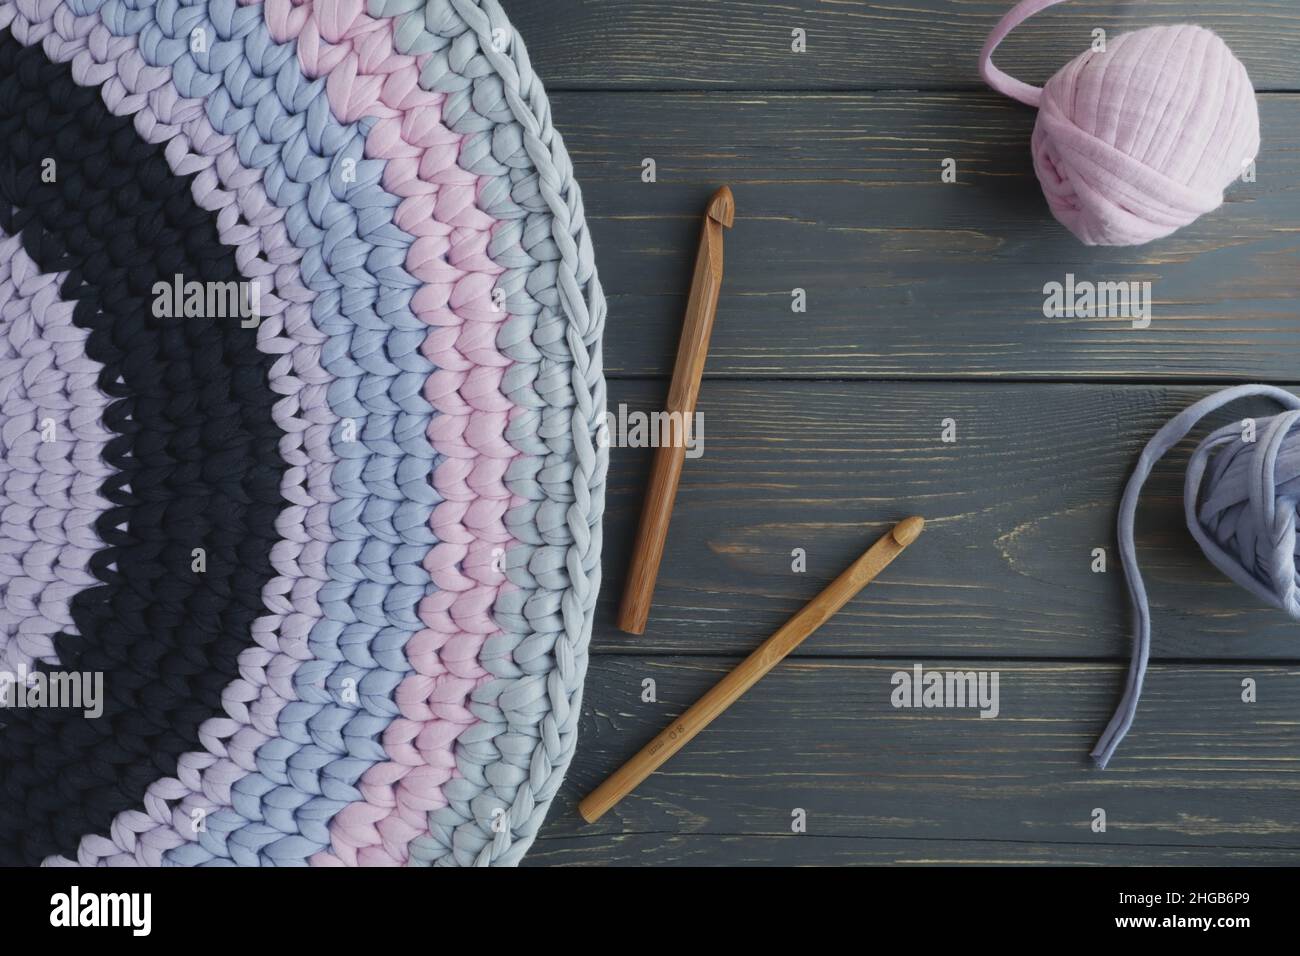 A mat made of knitted yarn and a crochet hook on a gray wooden background with space for text. Home needlework. Stock Photo